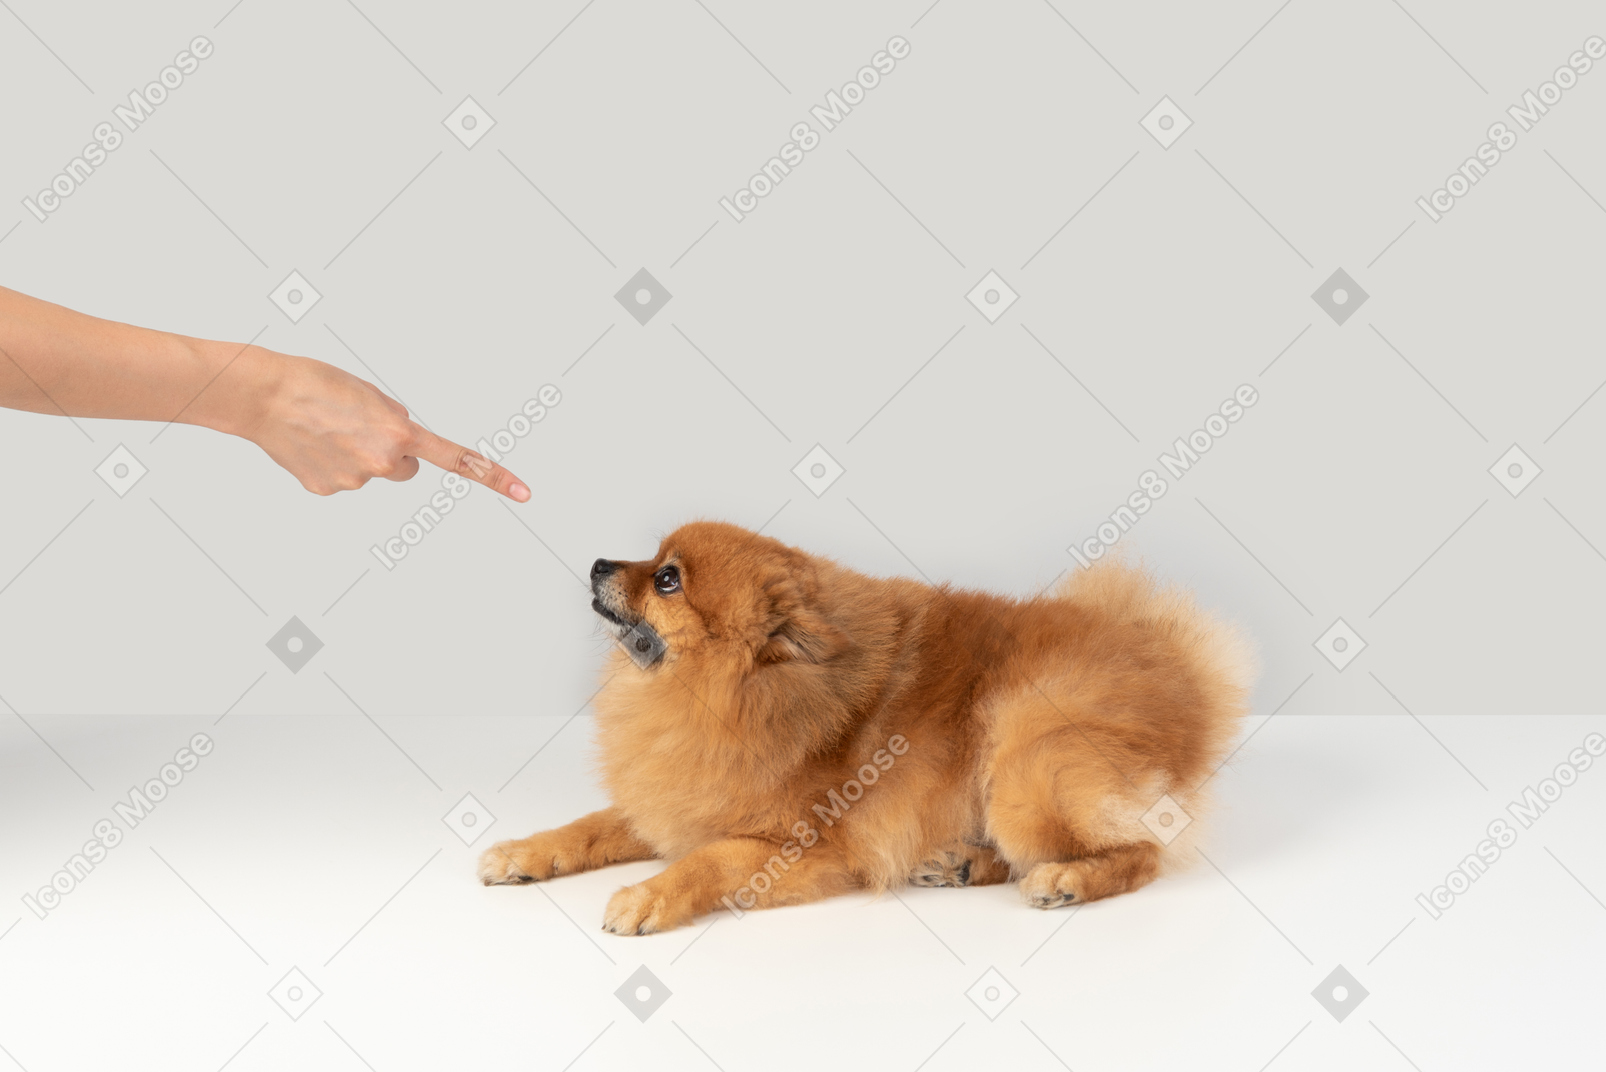 Pointing with finger to dog to sit